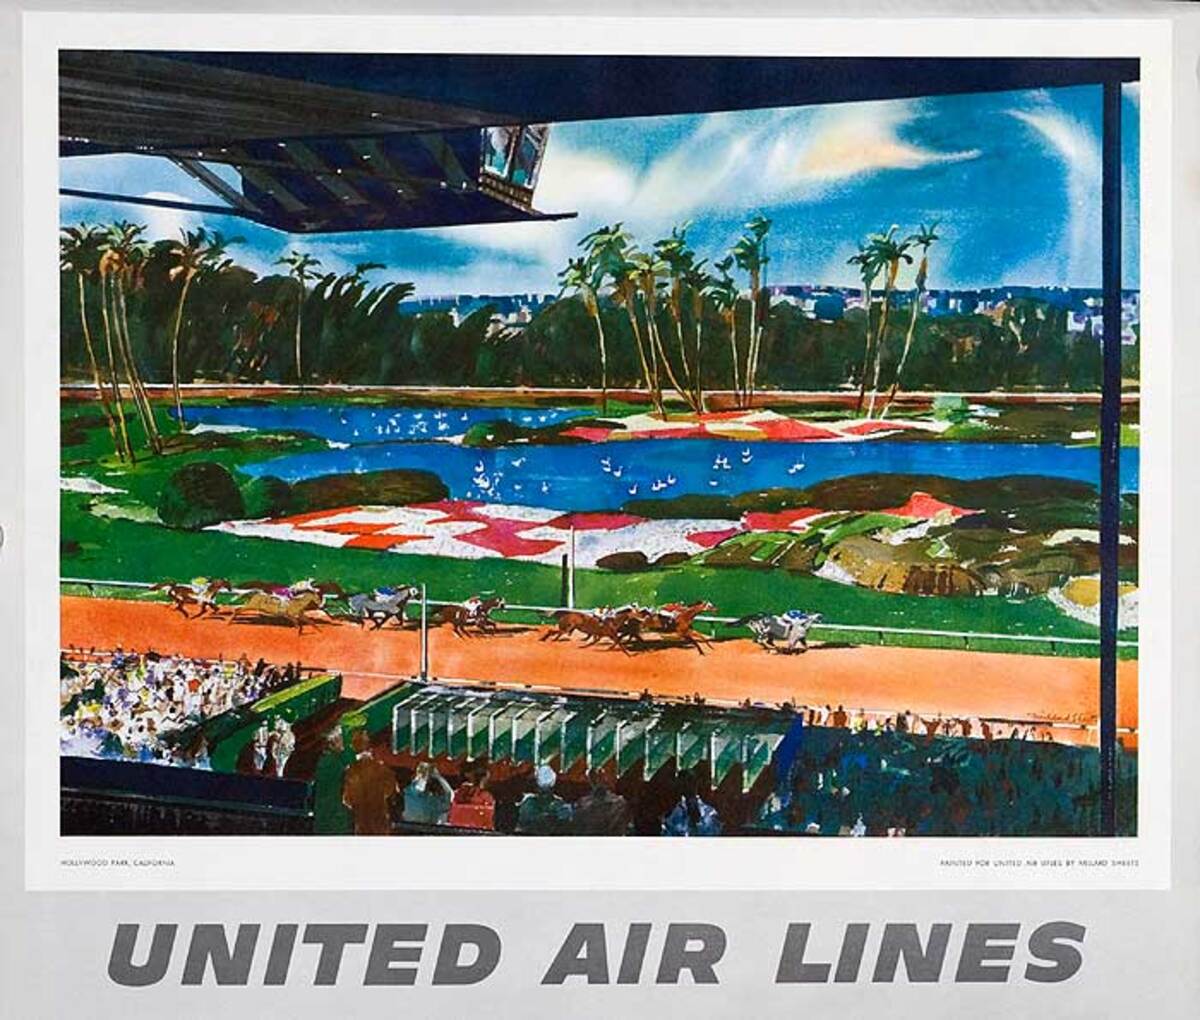 United Airlines Original Small Sized Poster Hollywood Park Racetrack California